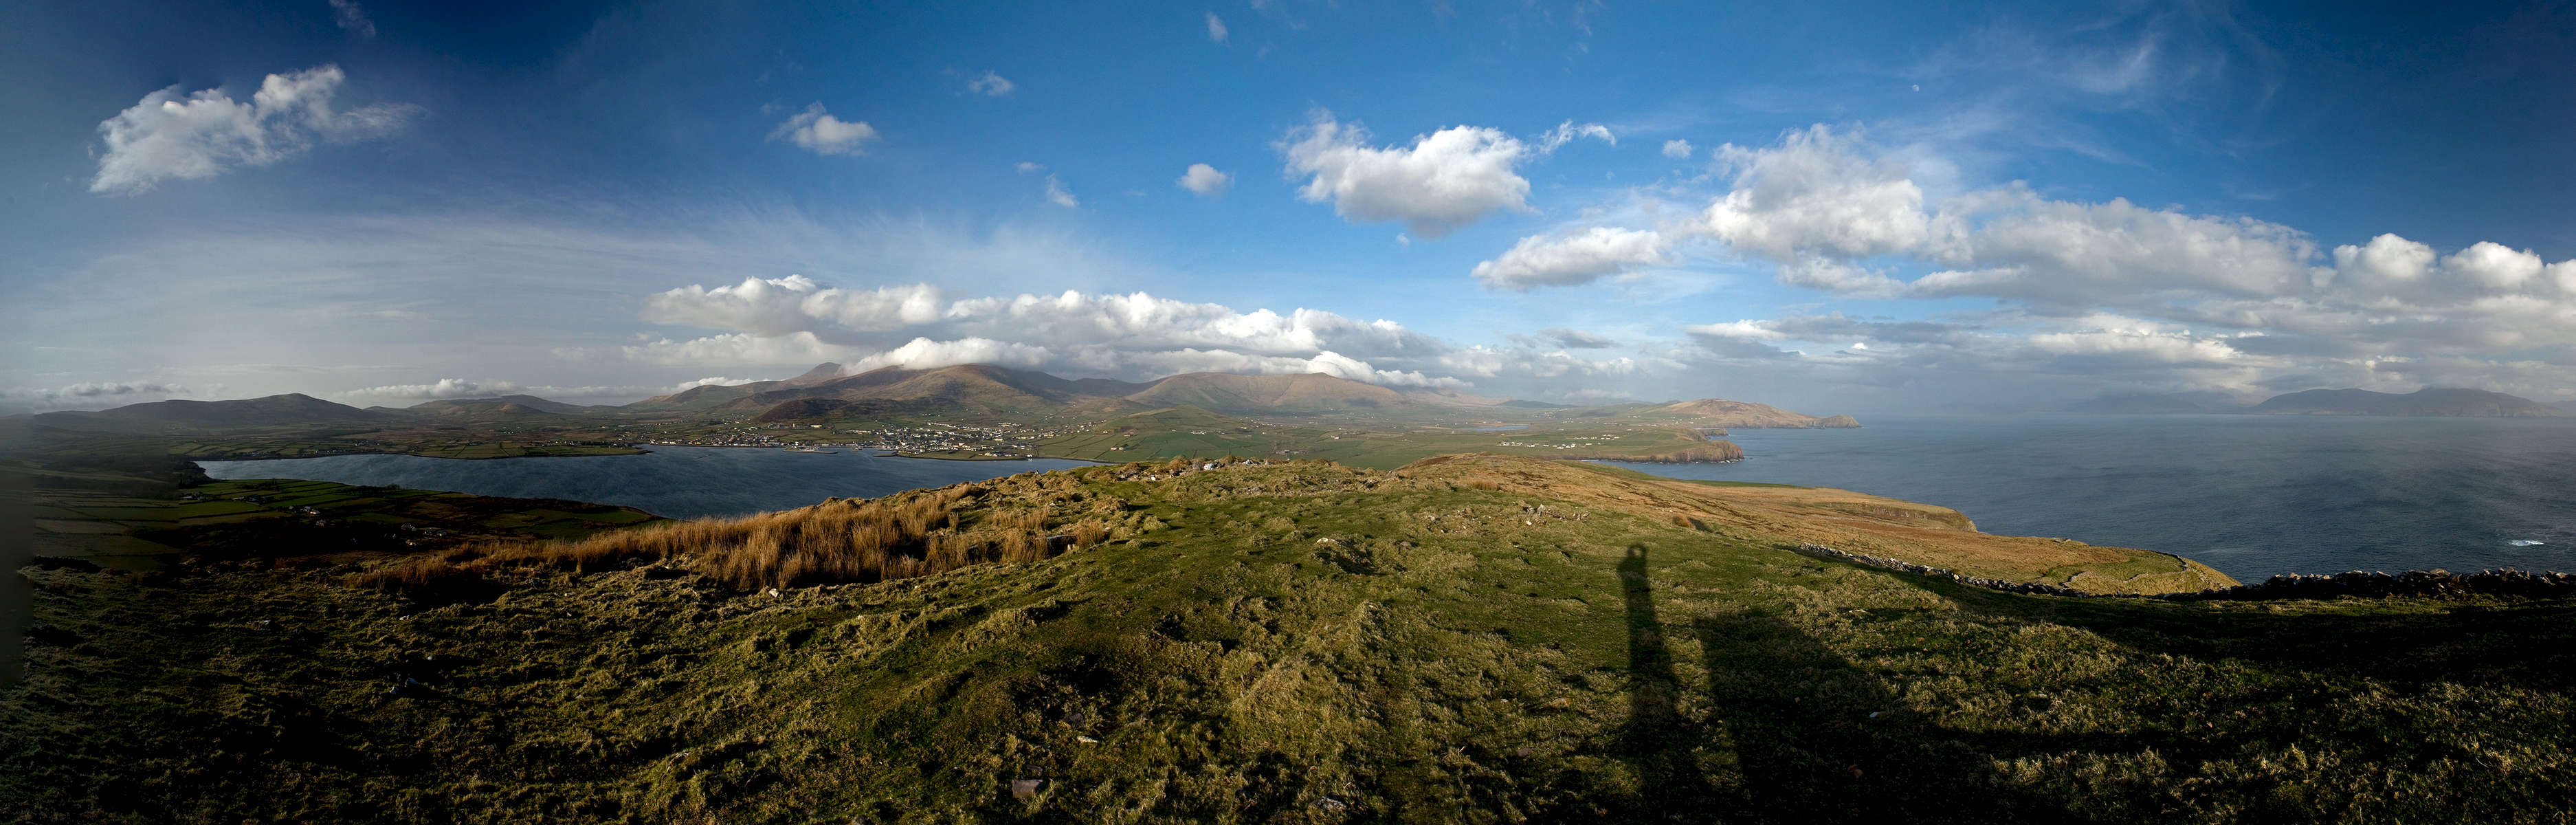 A view north and east from this prominant landmark overlooking Dingle HarbourCounty Kerry, Republic of IrelandNikon D300, 17-35mm, stitched panorama(ten images, shot in portrait format)